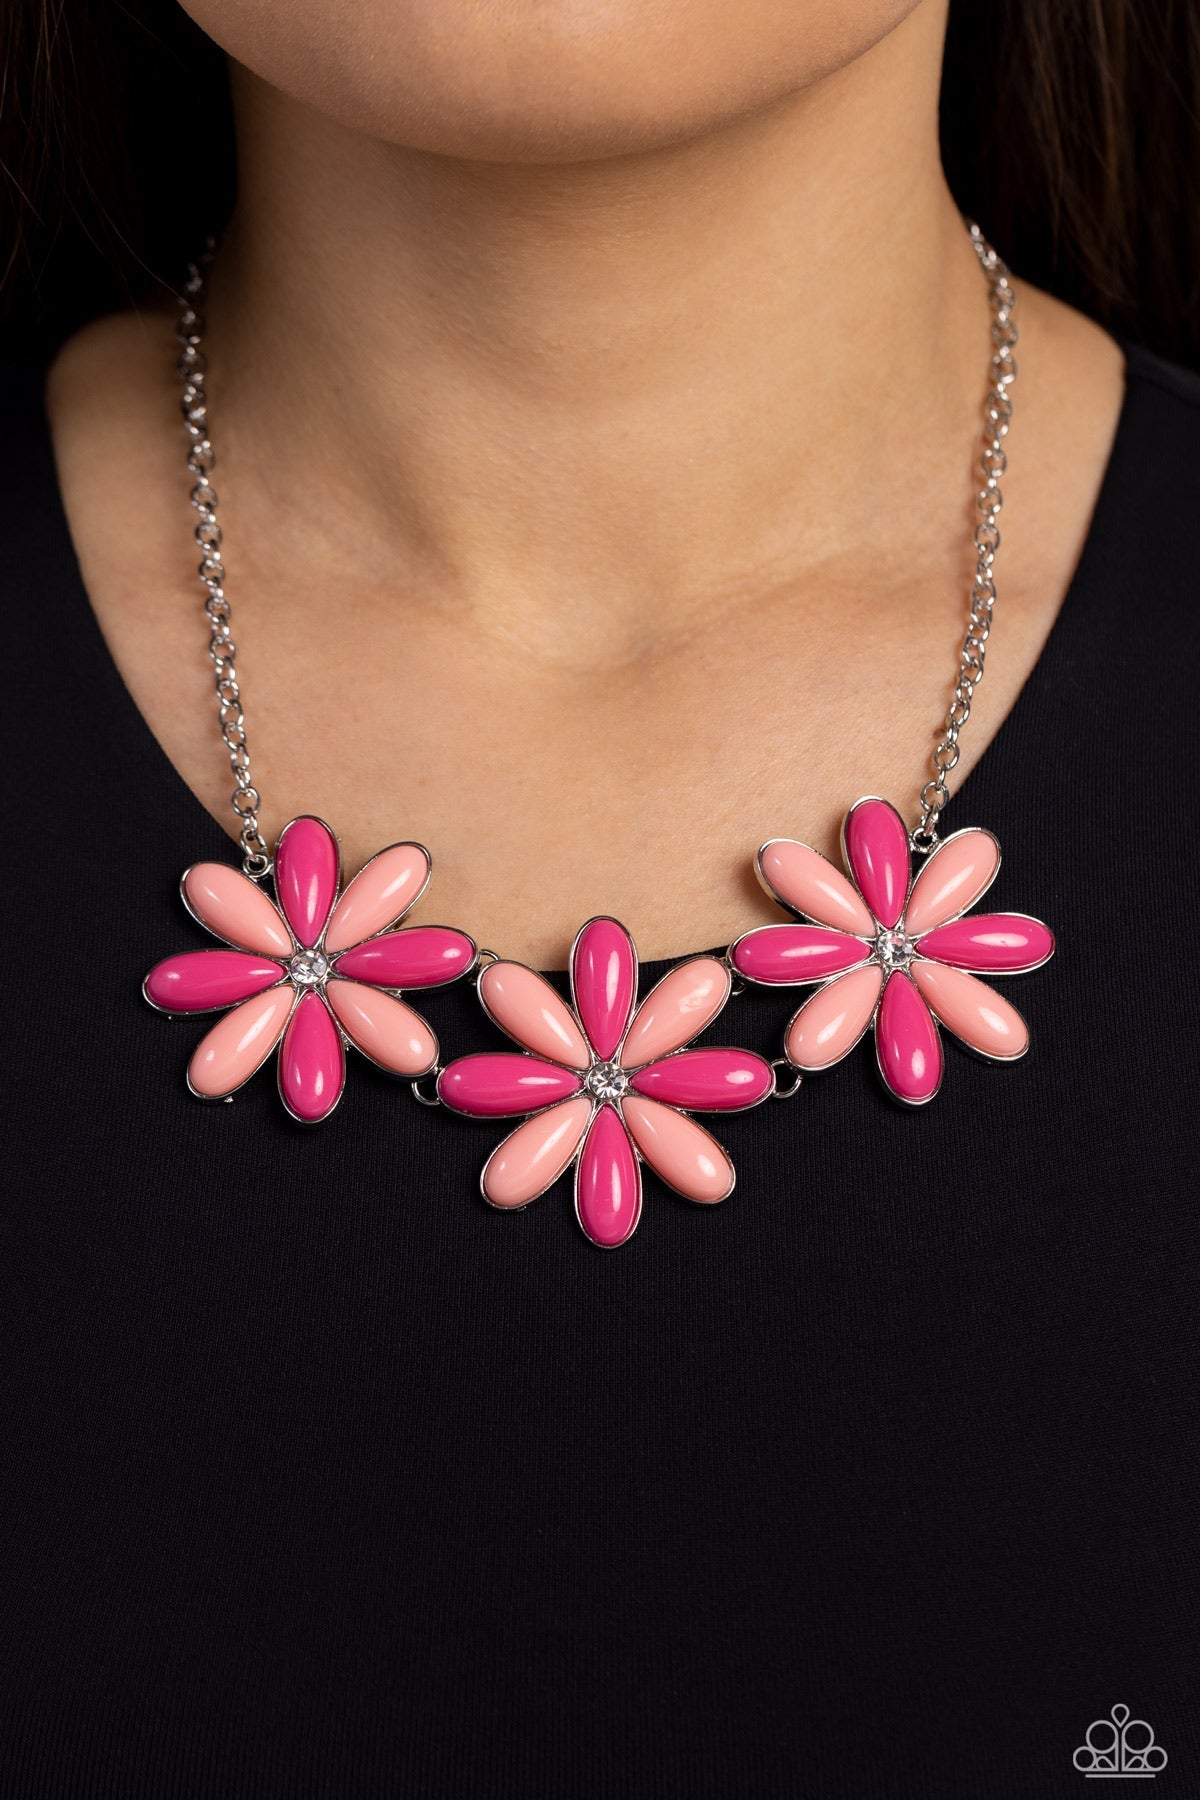 Bodacious Bouquet - Pink Bead Petals/White Rhinestone Centers Paparazzi Necklace & matching earrings